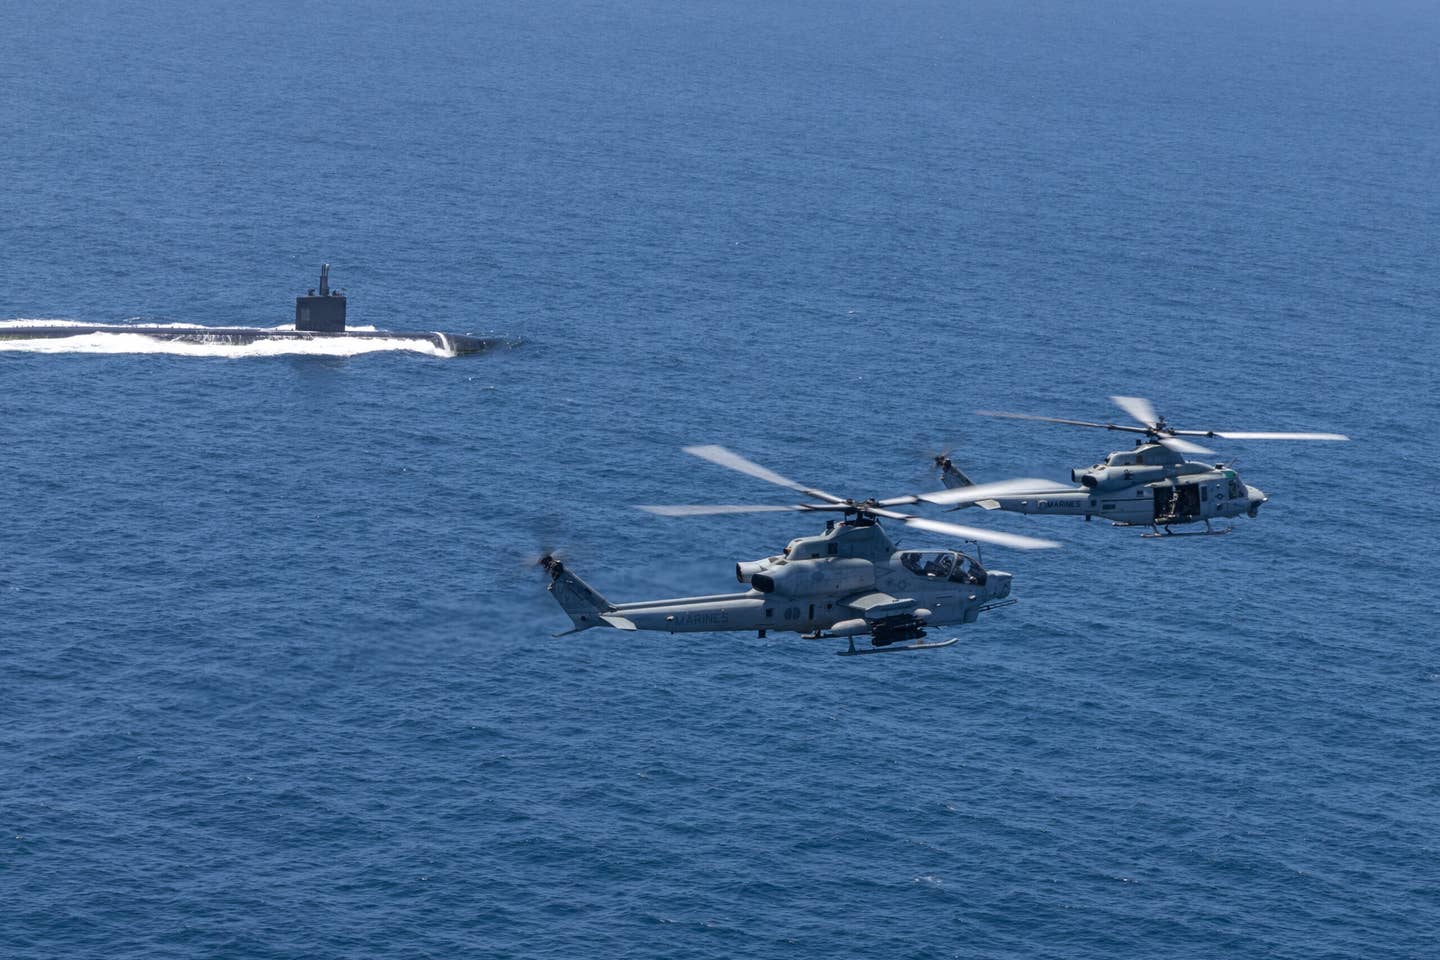 U.S. Marine Corps AH-1Z and UH-1Y helicopters with Marine Light Attack Helicopter Squadron 267, Marine Aircraft Group 16, 3rd Marine Aircraft Wing, fly over a U.S. Navy submarine during the Summer Fury 21 exercise at San Clemente, California, in July 2021. <em>U.S. Marine Corps </em>